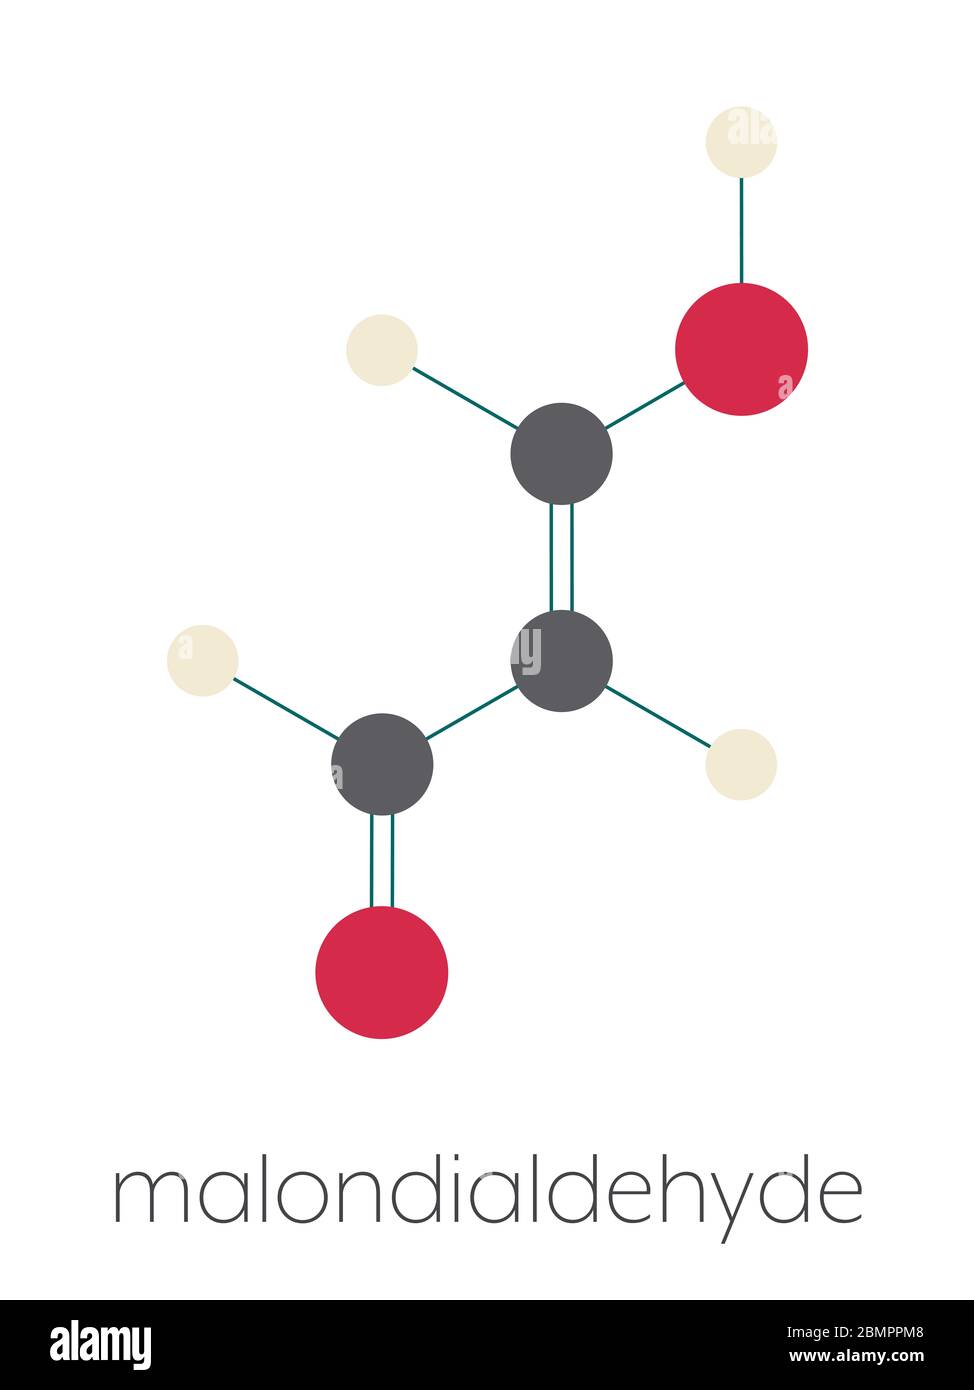 Malondialdehyde (MDA, enol form) molecule. Marker of oxidative stress and naturally produced during the lipid peroxidation of polyunsaturated fatty acids. Stylized skeletal formula (chemical structure): Atoms are shown as color-coded circles: hydrogen (beige), carbon (grey), oxygen (red). Stock Photo